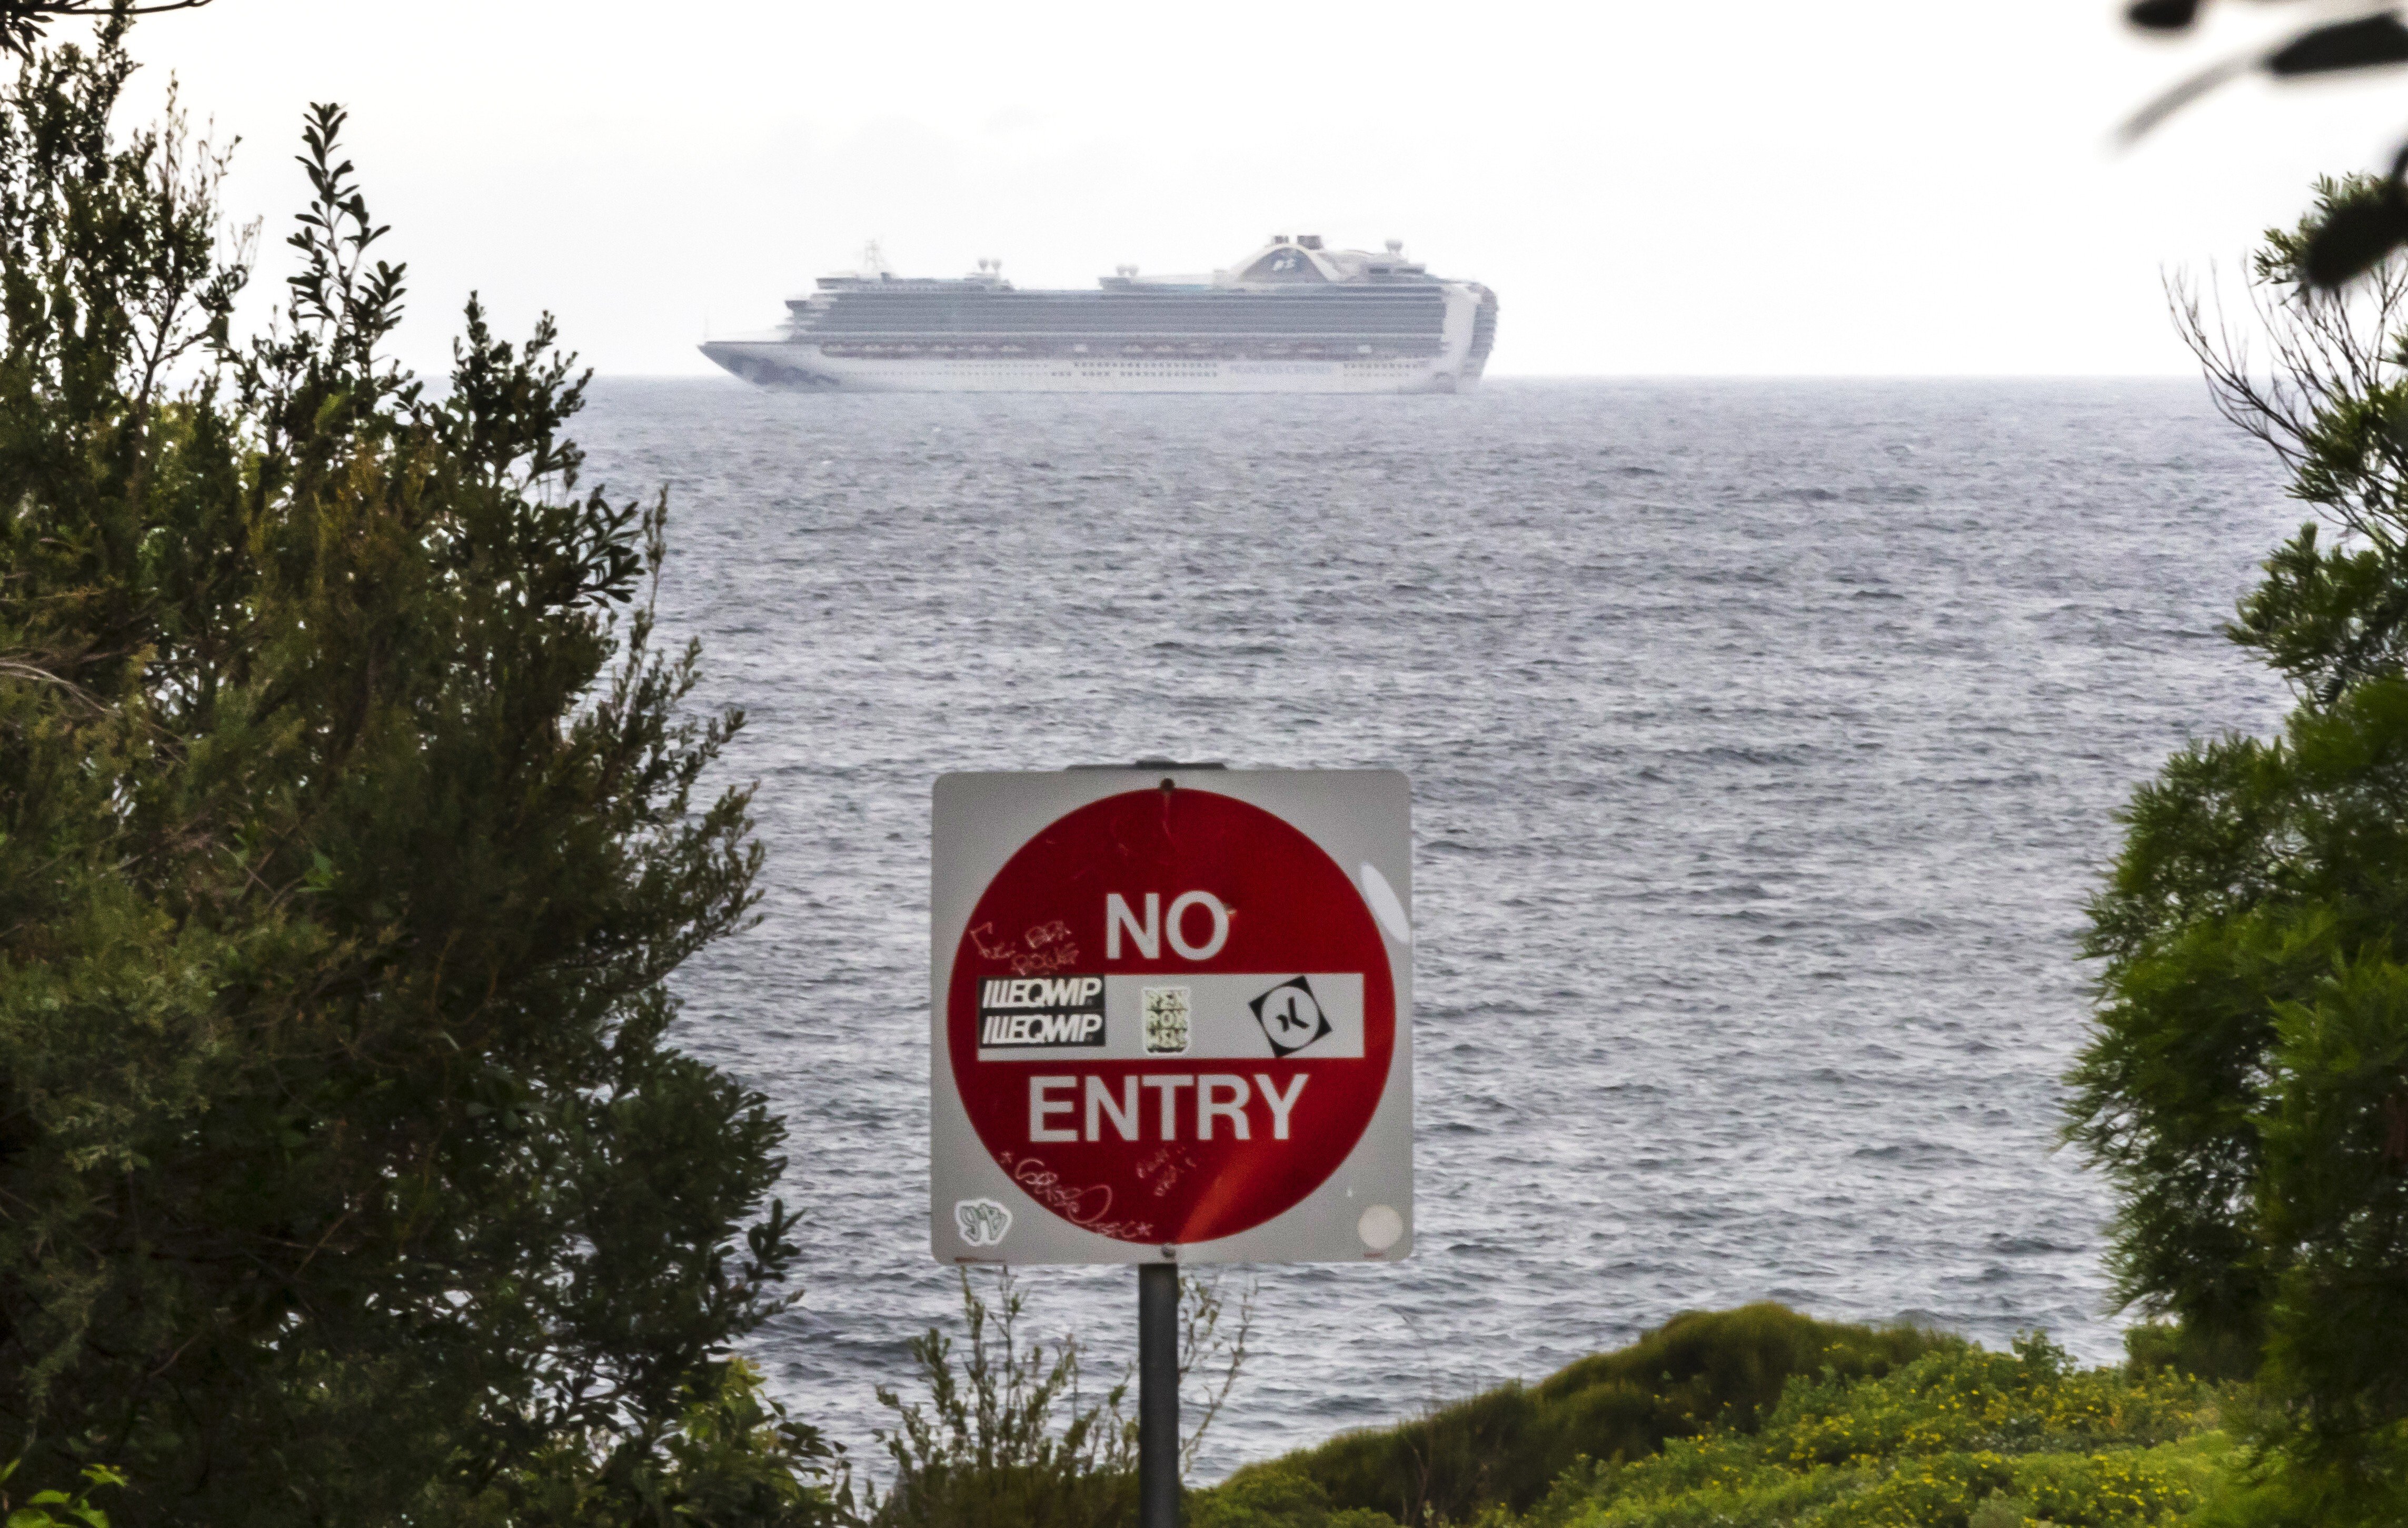 The Ruby Princess cruise ship is seen from Kurnell National Park in Sydney, on Thursday. There are more than 450 Covid-19 infections linked to cruise ships, including 340 cases from the Ruby Princess and 74 from the Ovation of the Seas. Photo: AAP Image